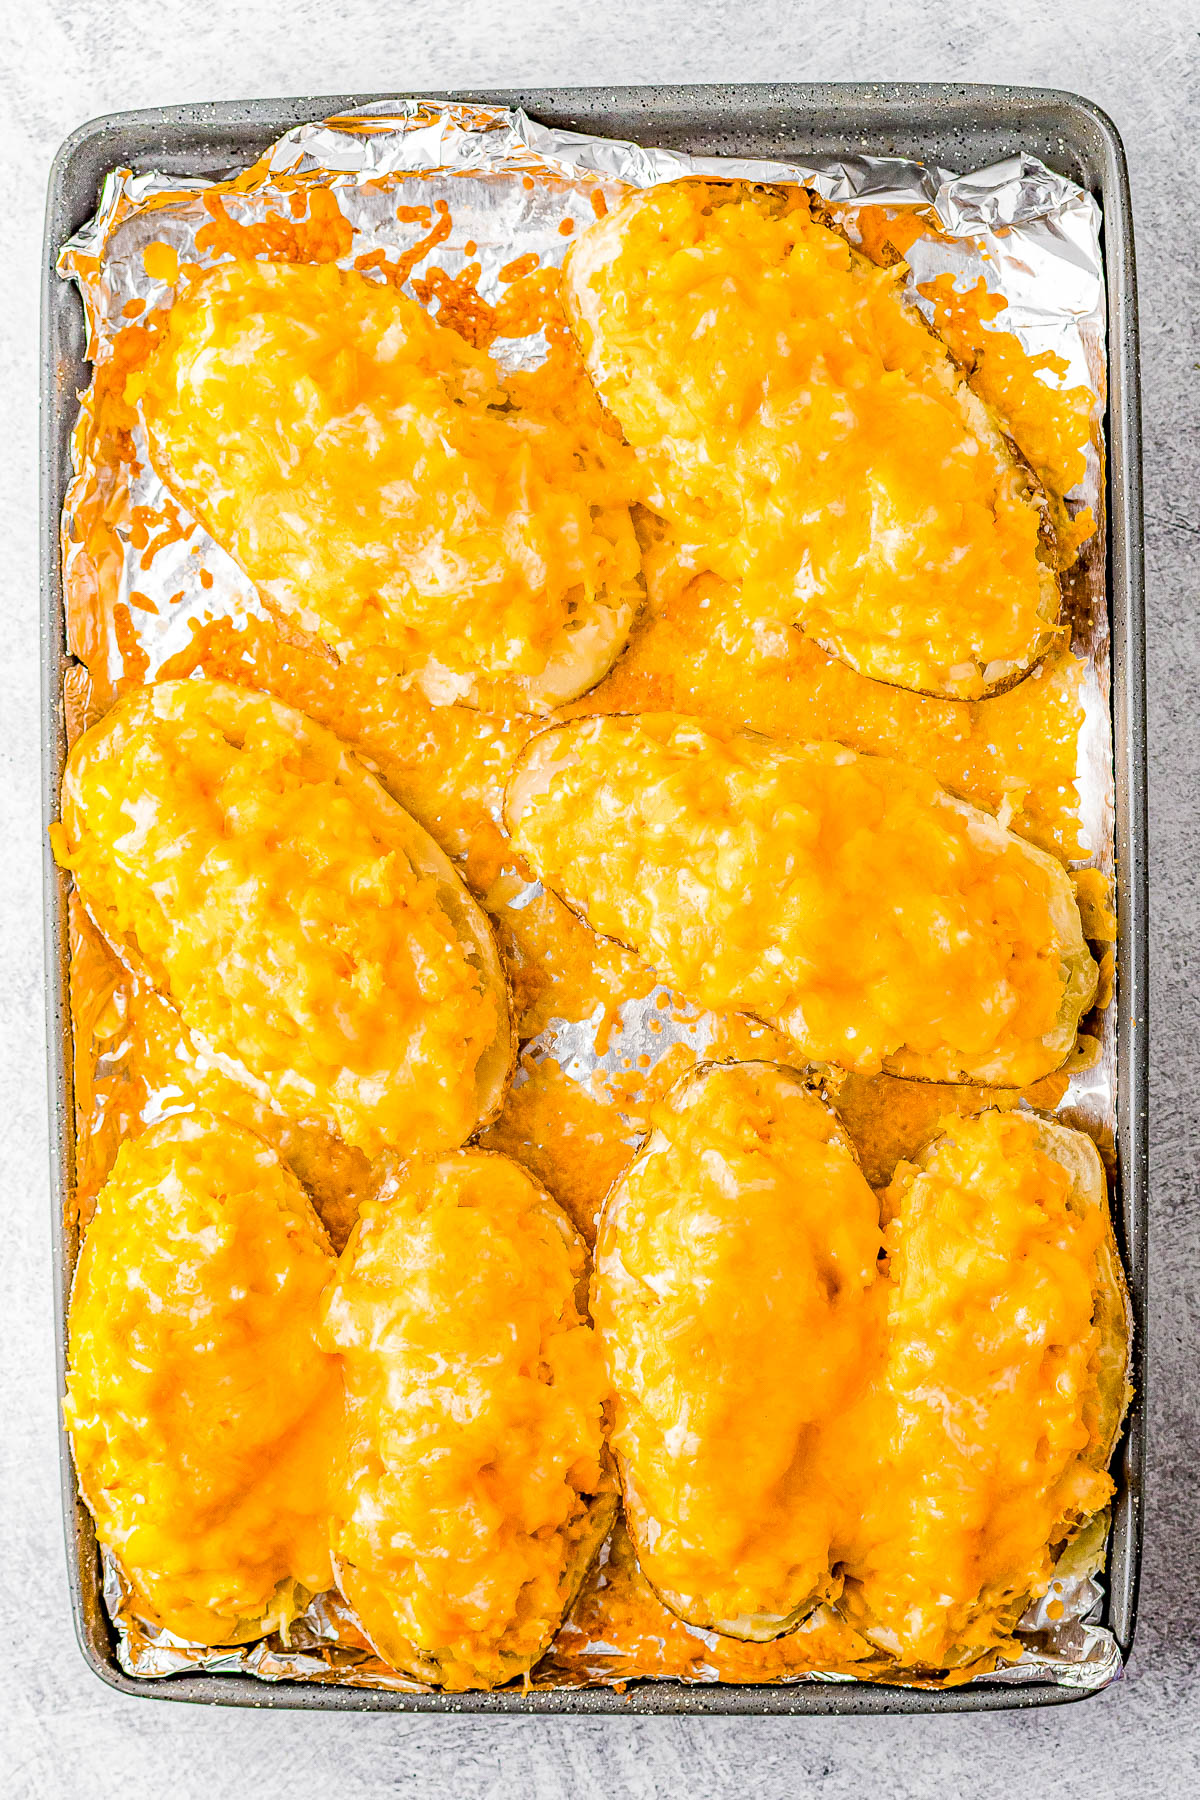 Buffalo Chicken Stuffed Potatoes – If you love the tang and heat of buffalo chicken wings, then you're going to love these EASY stuffed potatoes! Chock full of shredded buffalo chicken, cheddar and mozzarella cheeses, cream cheese, and sour cream, I promise these are a COMFORT FOOD delight! Whether you make them as a main dish for a weeknight dinner, as a party appetizer, or as a game day snack, everyone LOVES them!